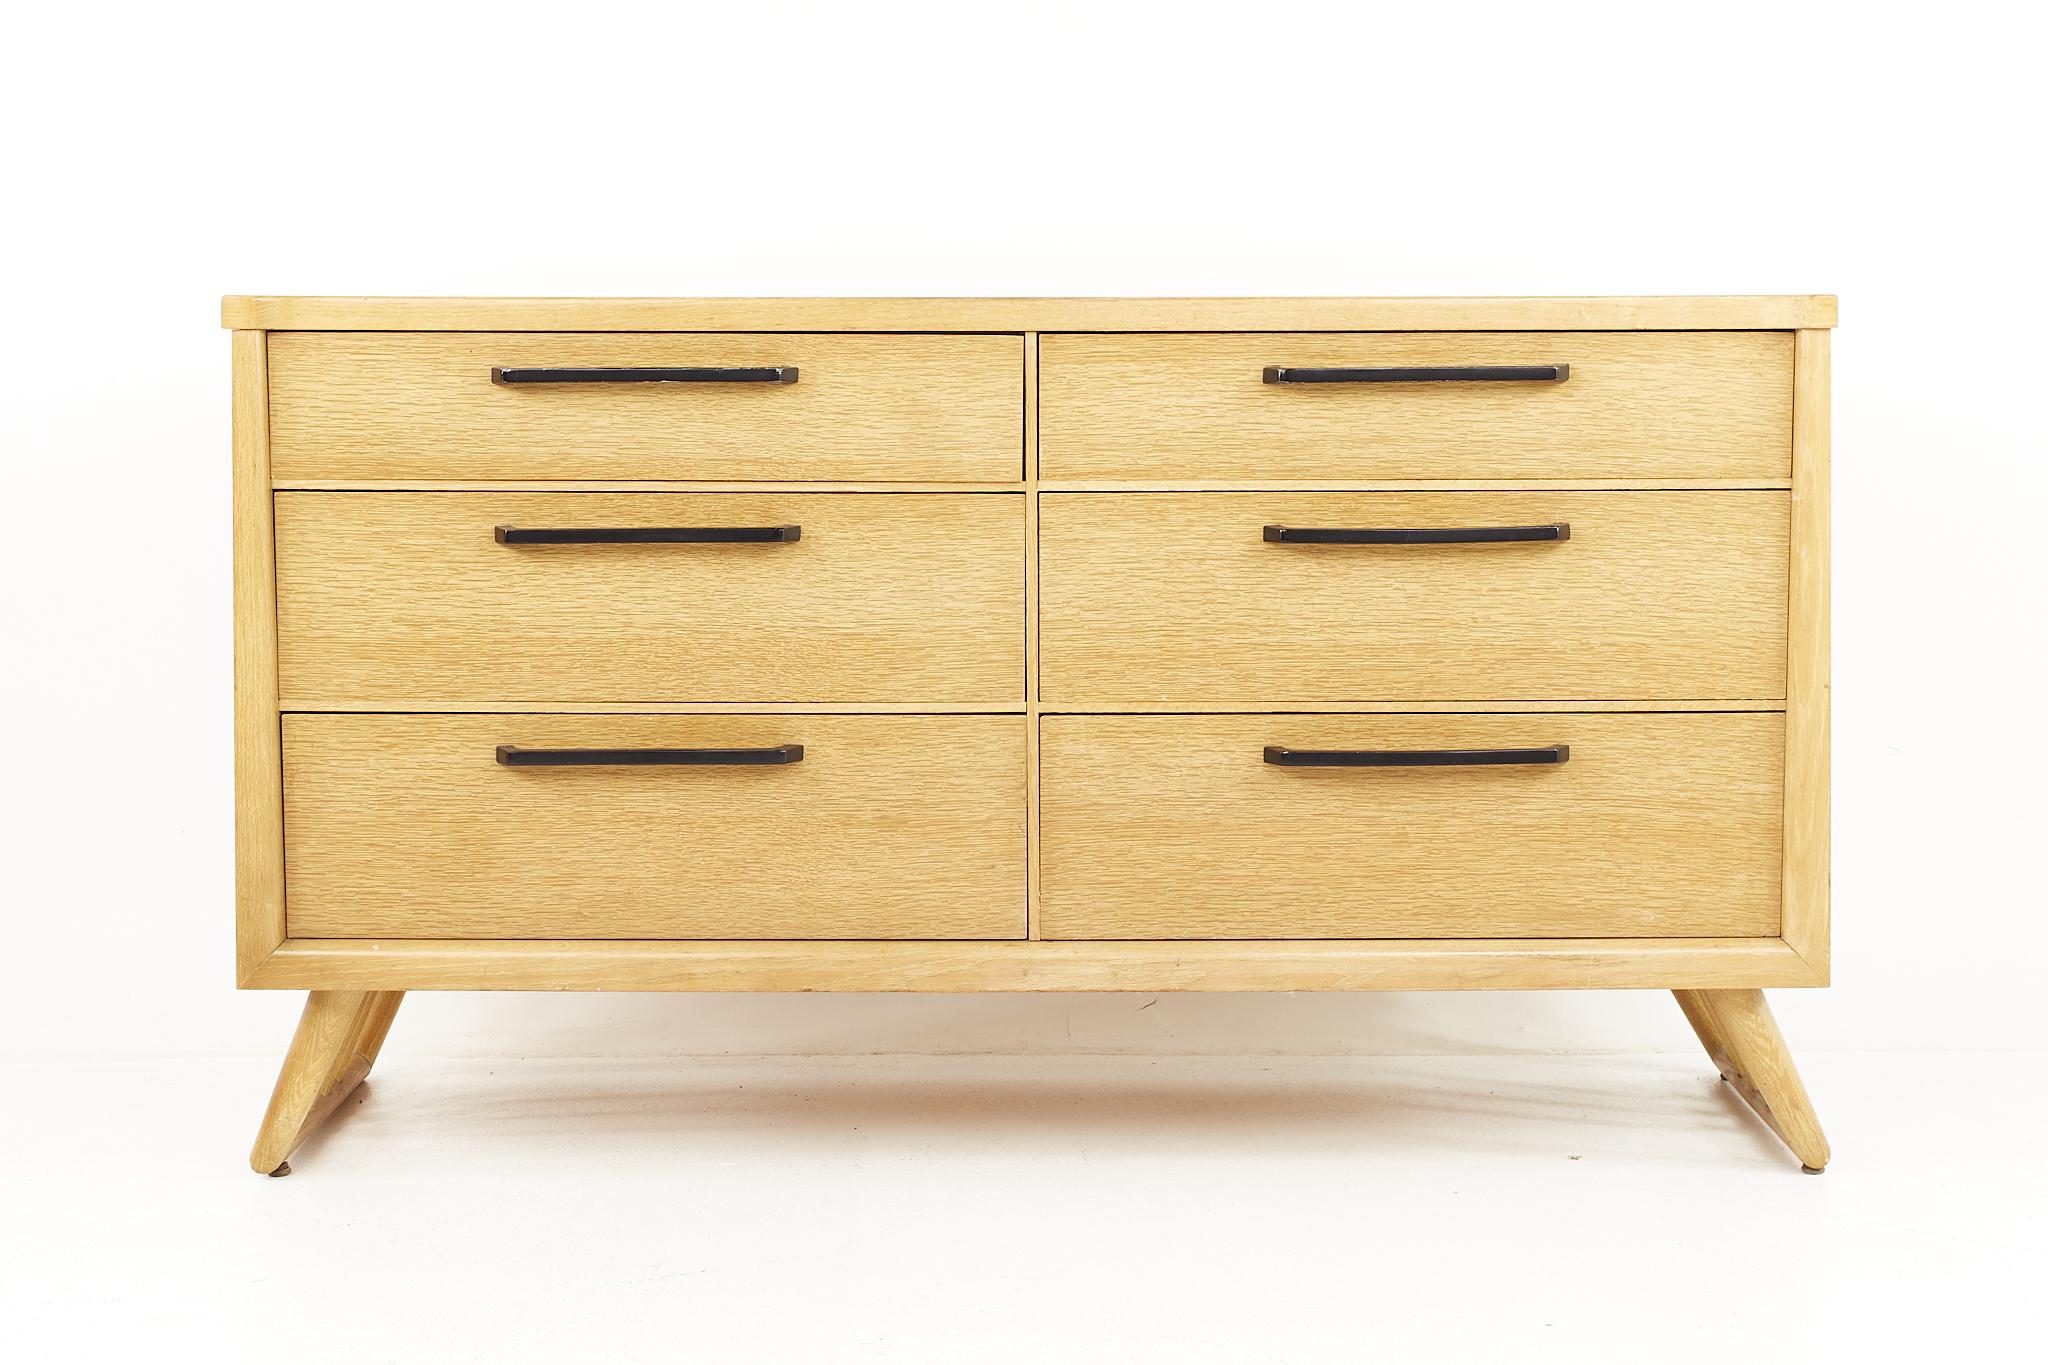 Milo Baughman style mid century blonde 6 drawer lowboy dresser

The dresser measures: 58 wide x 20 deep x 32.25 inches high 

All pieces of furniture can be had in what we call restored vintage condition. That means the piece is restored upon